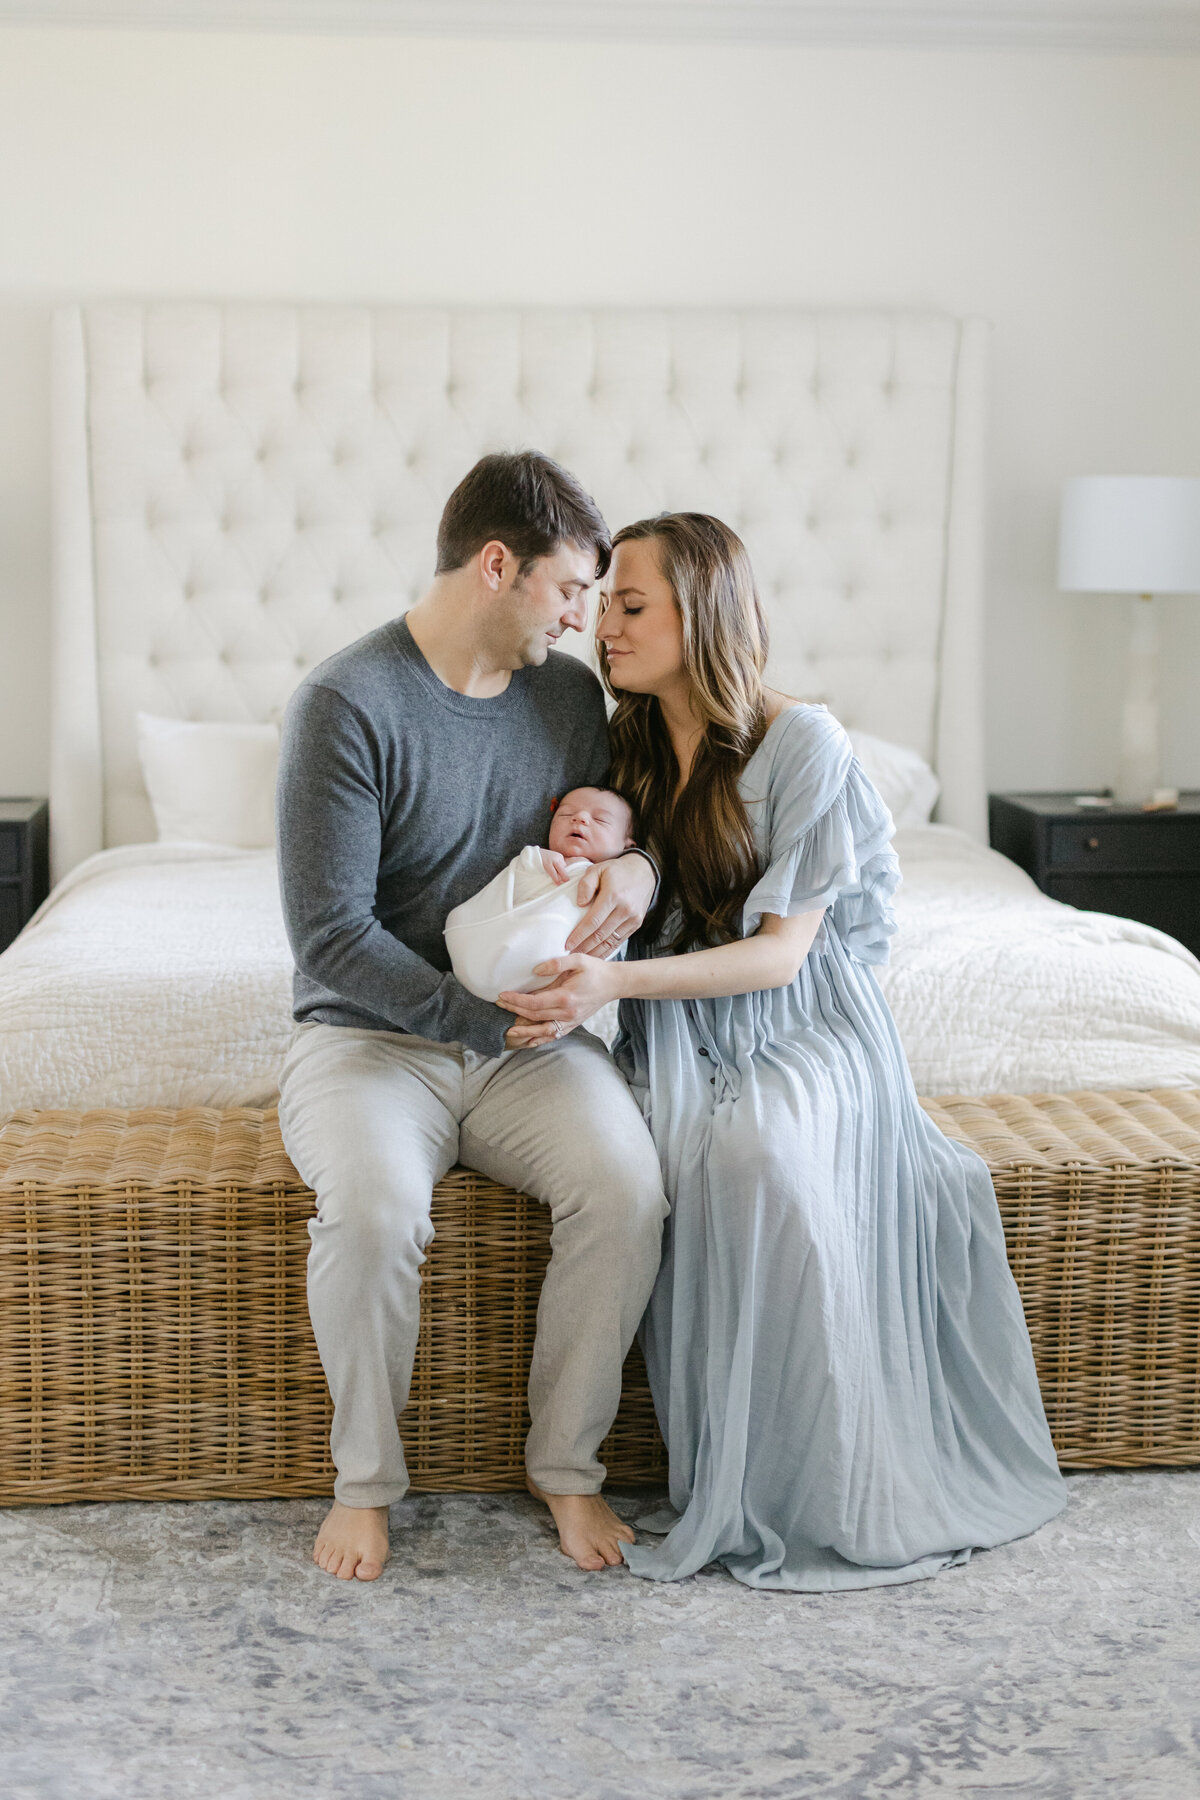 Mom and dad sitting at the foot of their bed holding their newborn baby during their in-home newborn session shot by Philadelphia Newborn Photographer Tara Federico